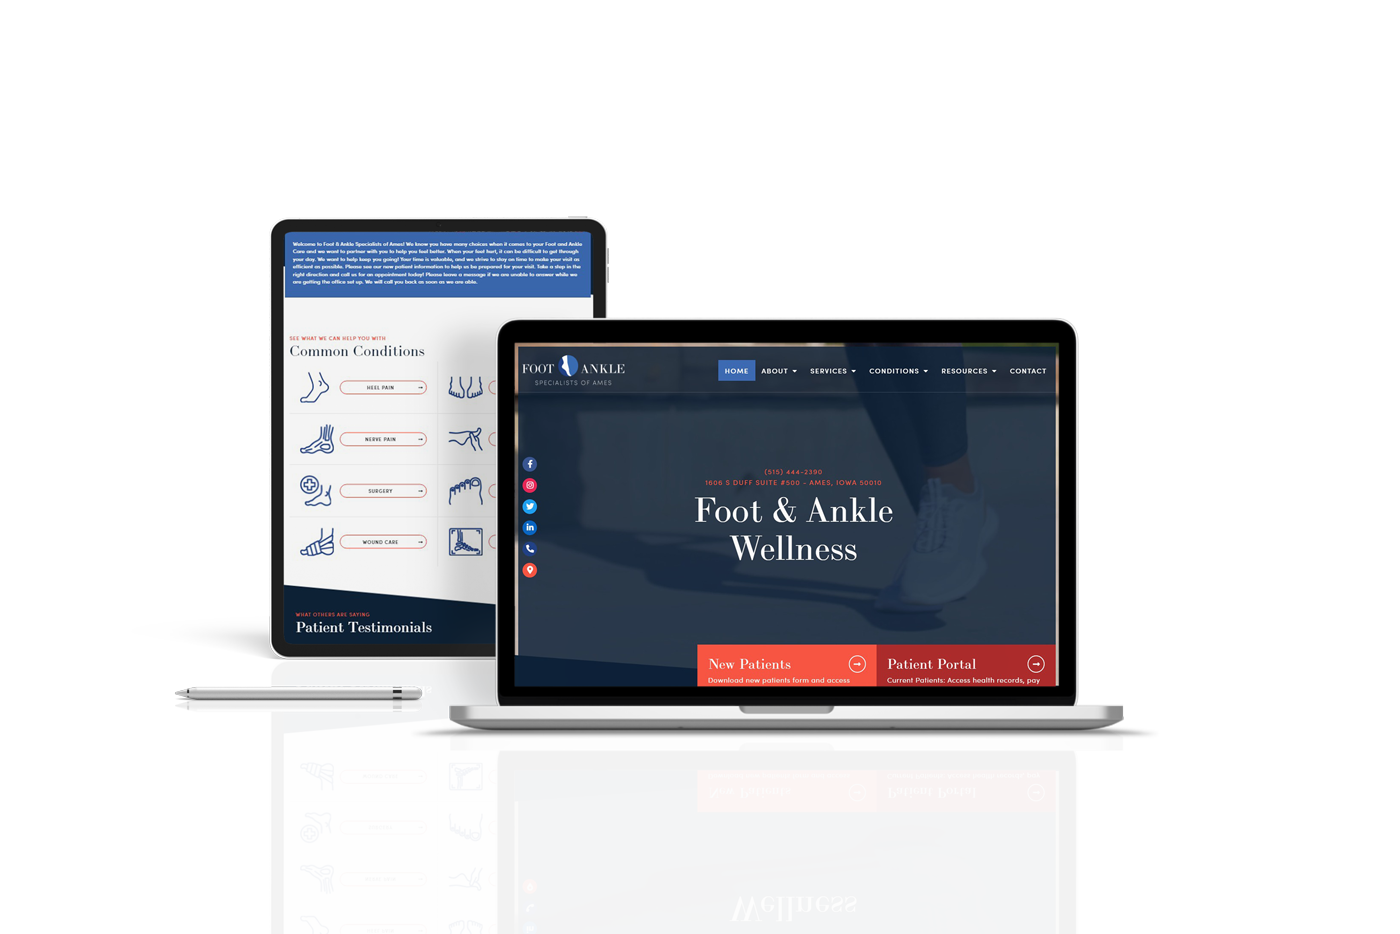 Mockups showing laptop and tablet views of the Foot & Ankle Specialists of Ames website